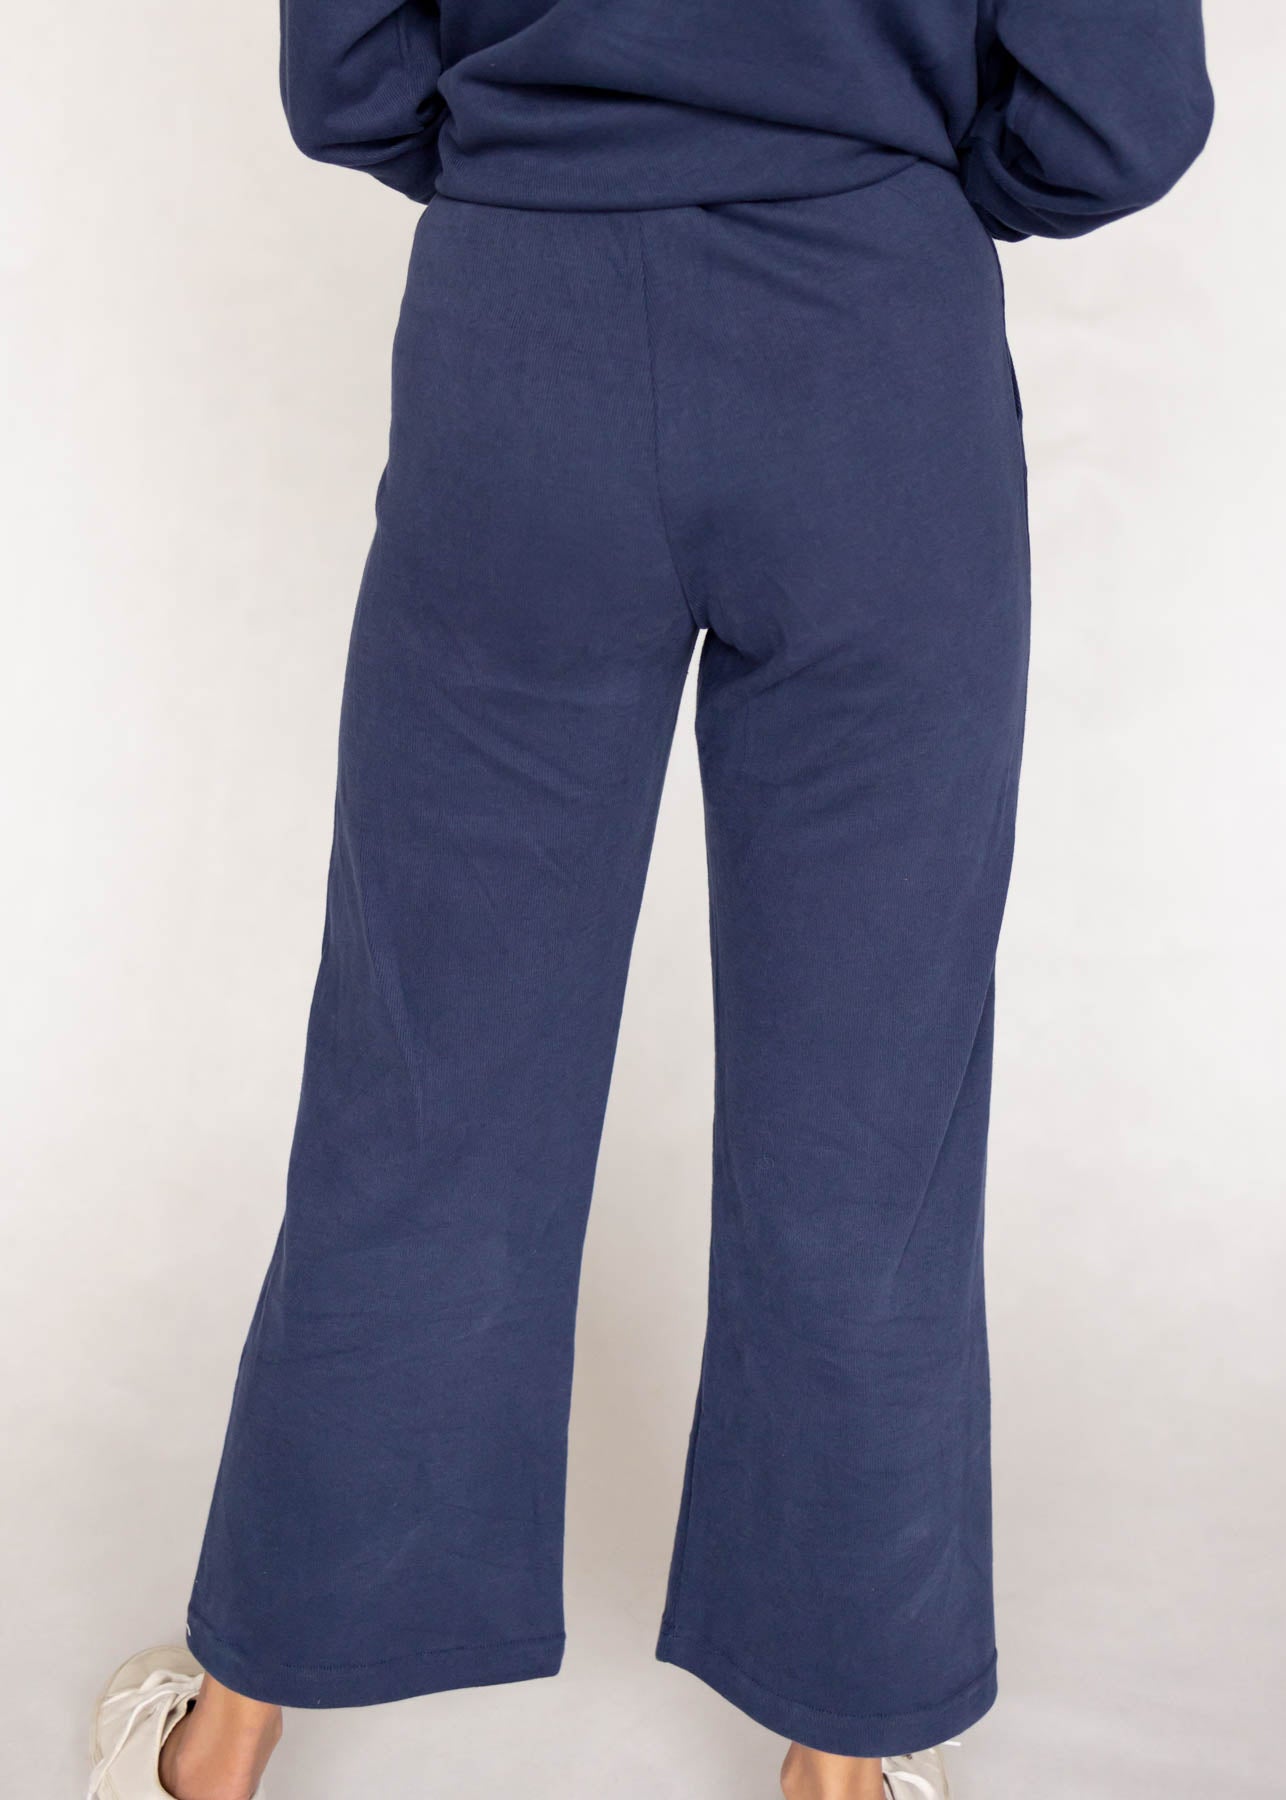 Back view of a dark navy pants